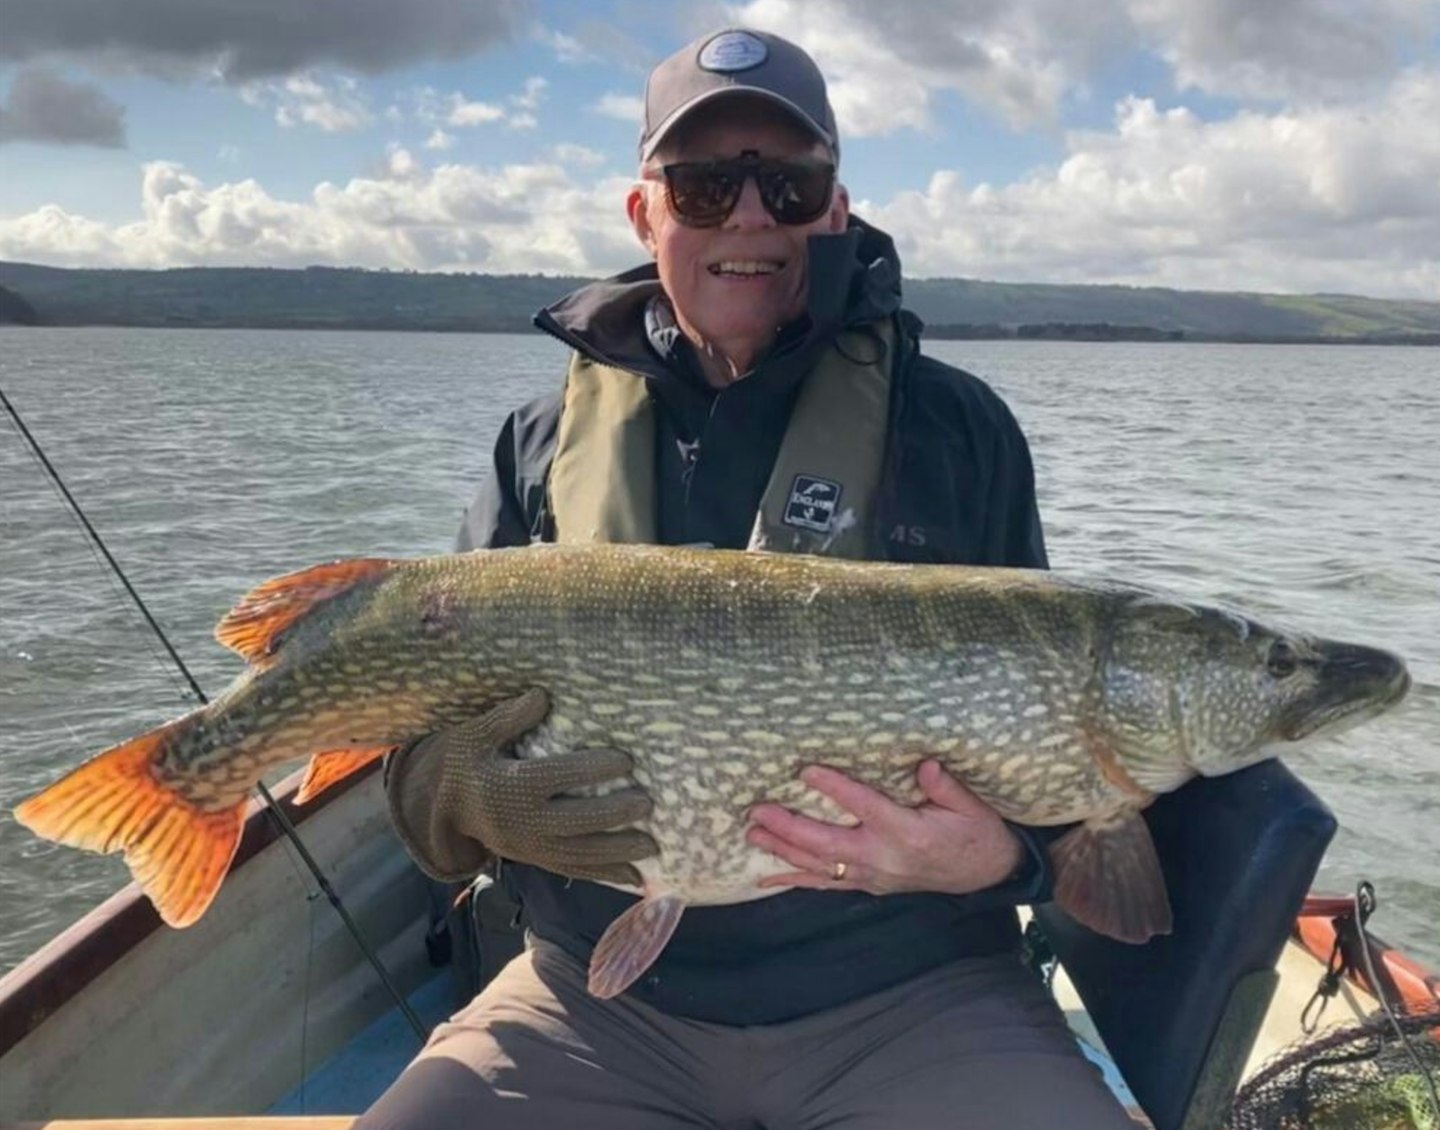 Barry with his monster pike of 43lb from Chew Valley Lake, Bristol